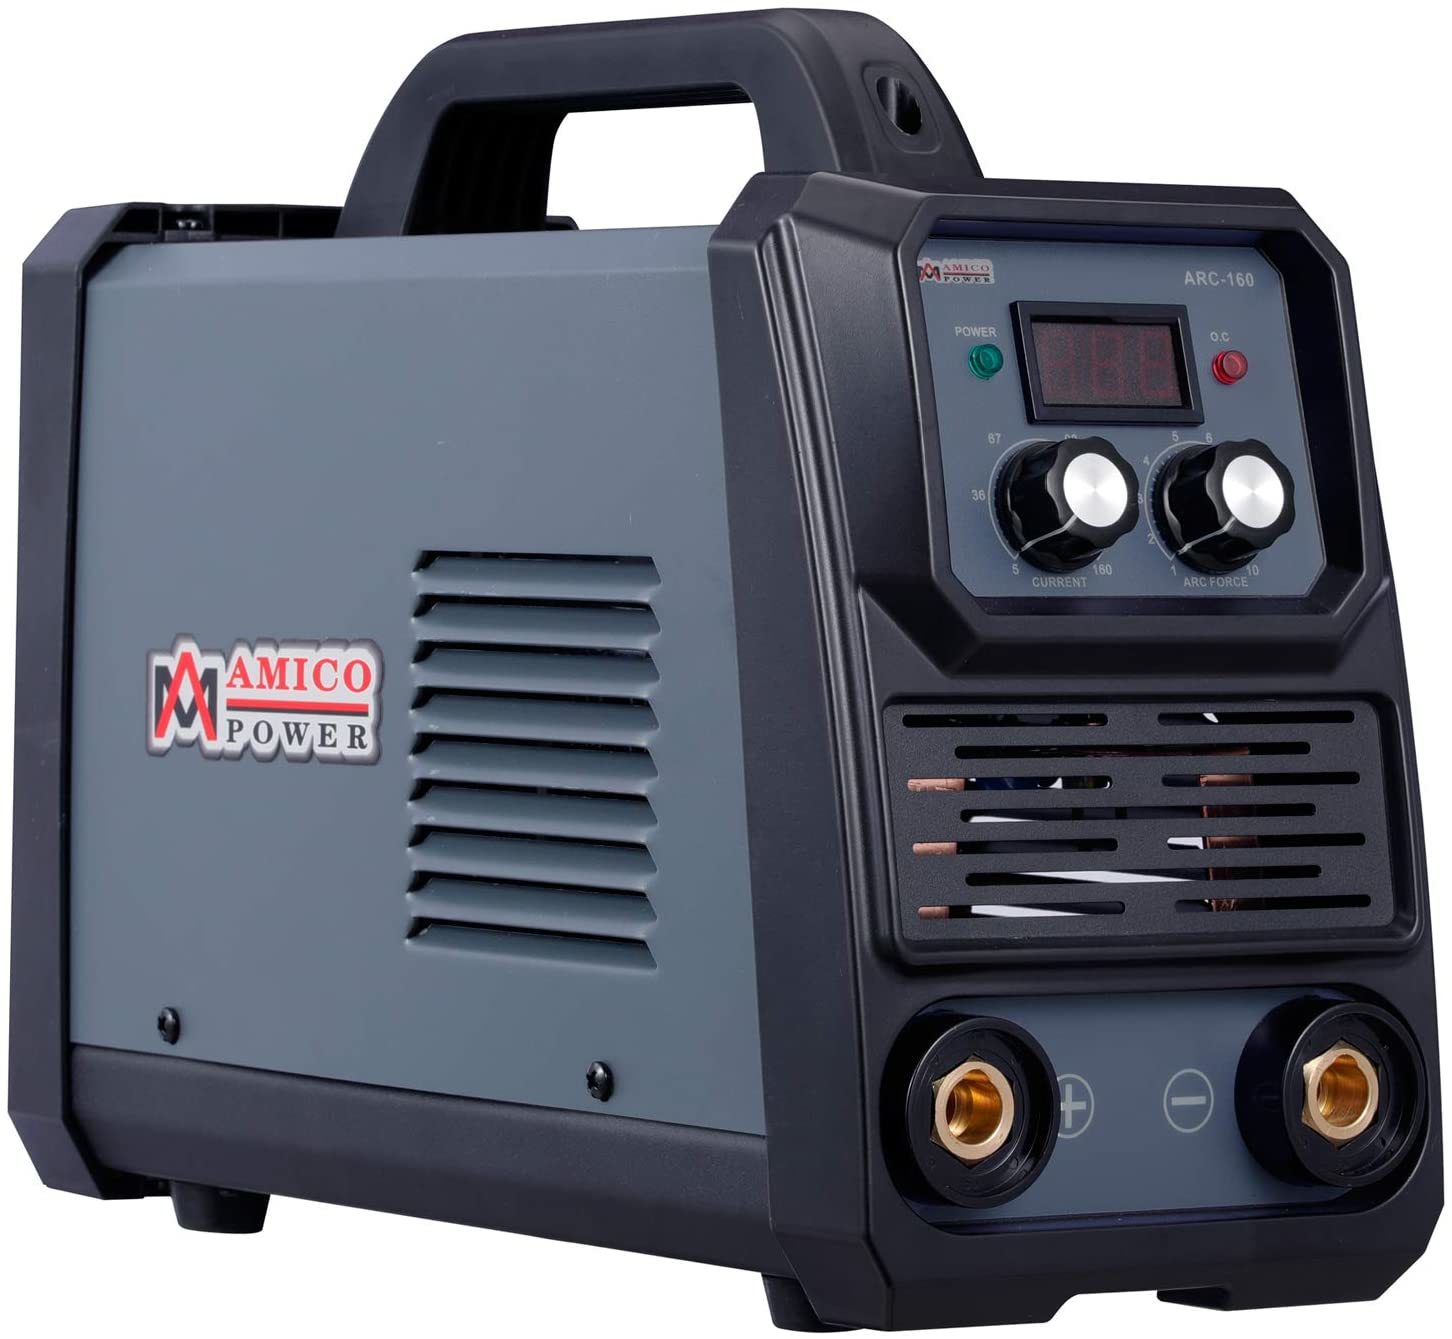 Amico 160 Amp Stick ARC Welder For Exhaust System